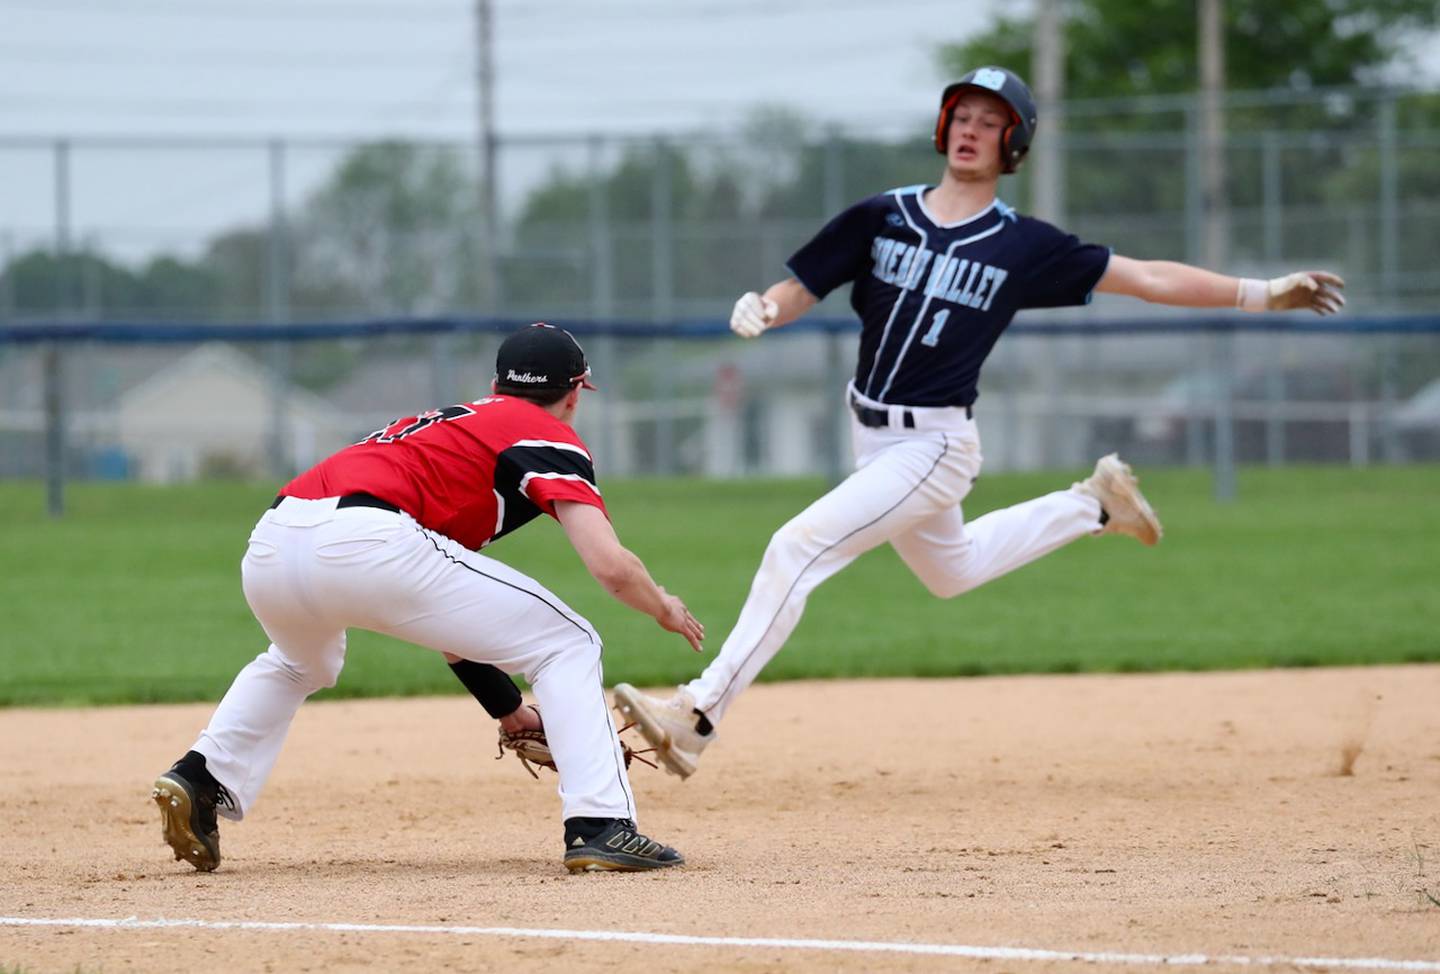 Bureau Valley's Brock Foster eludes the tag of E-P third baseman Connor Meadows in Monday's regional championship at Princeton.